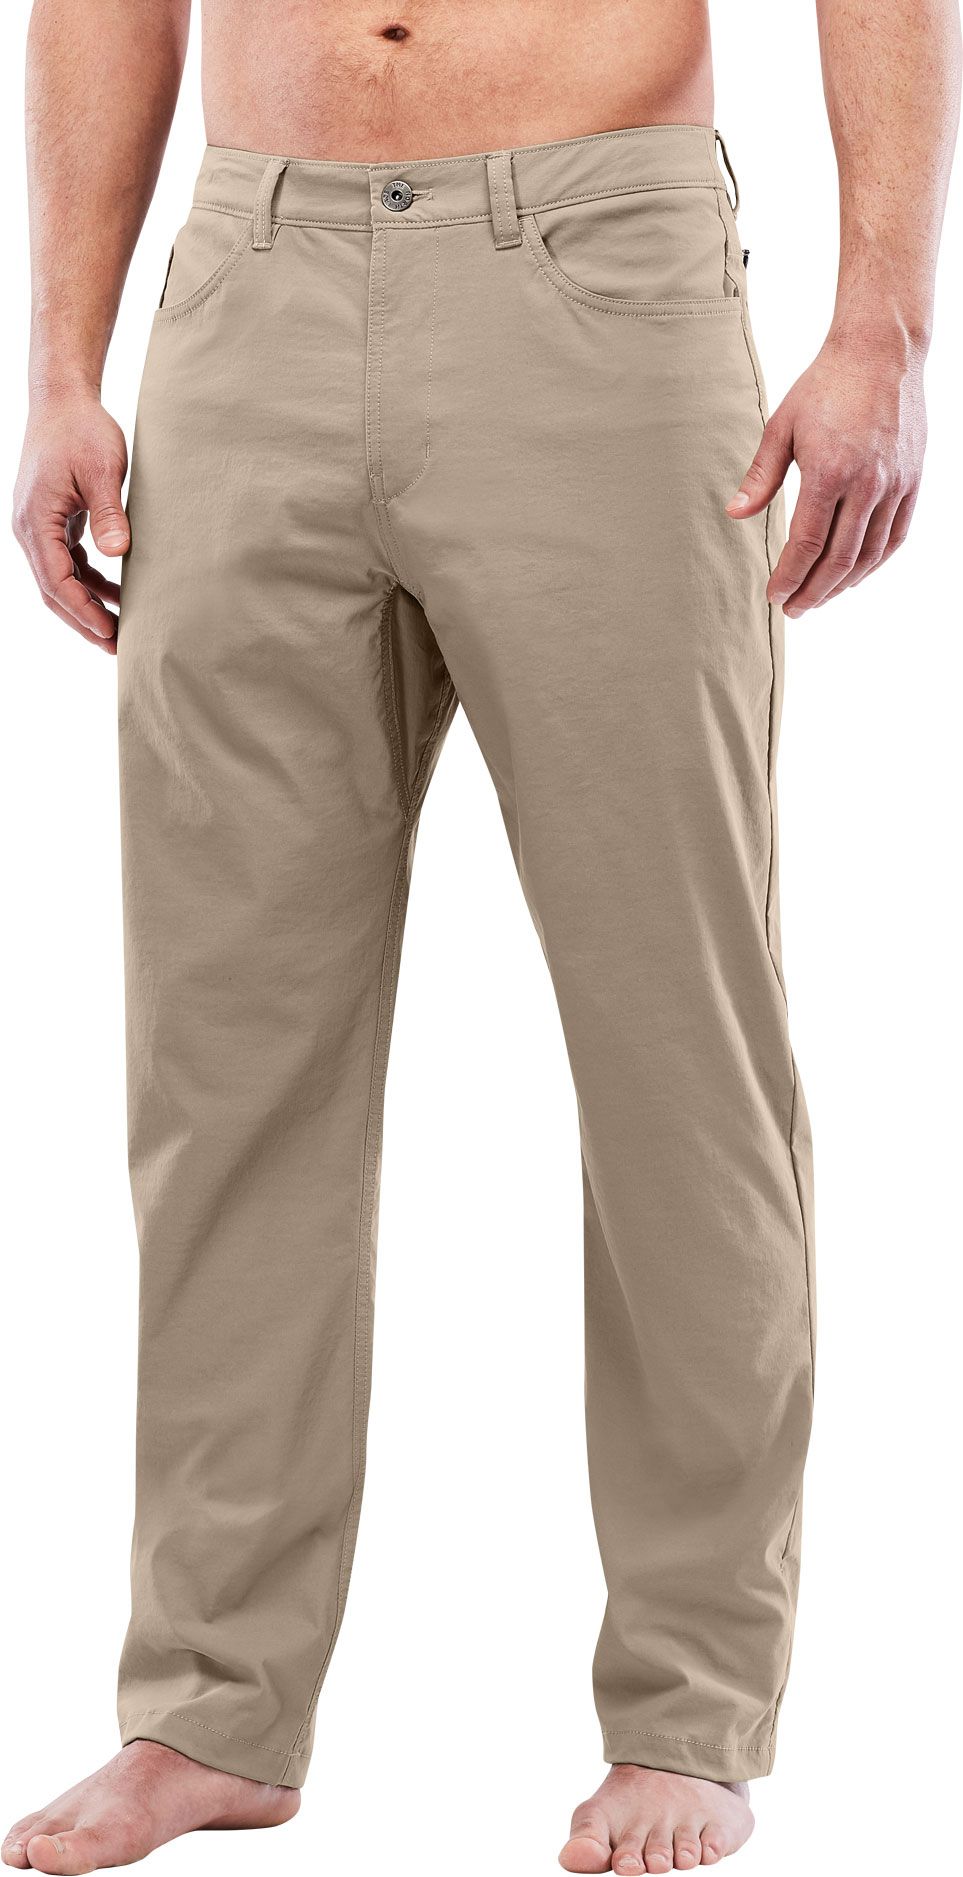 north face sprag pants review